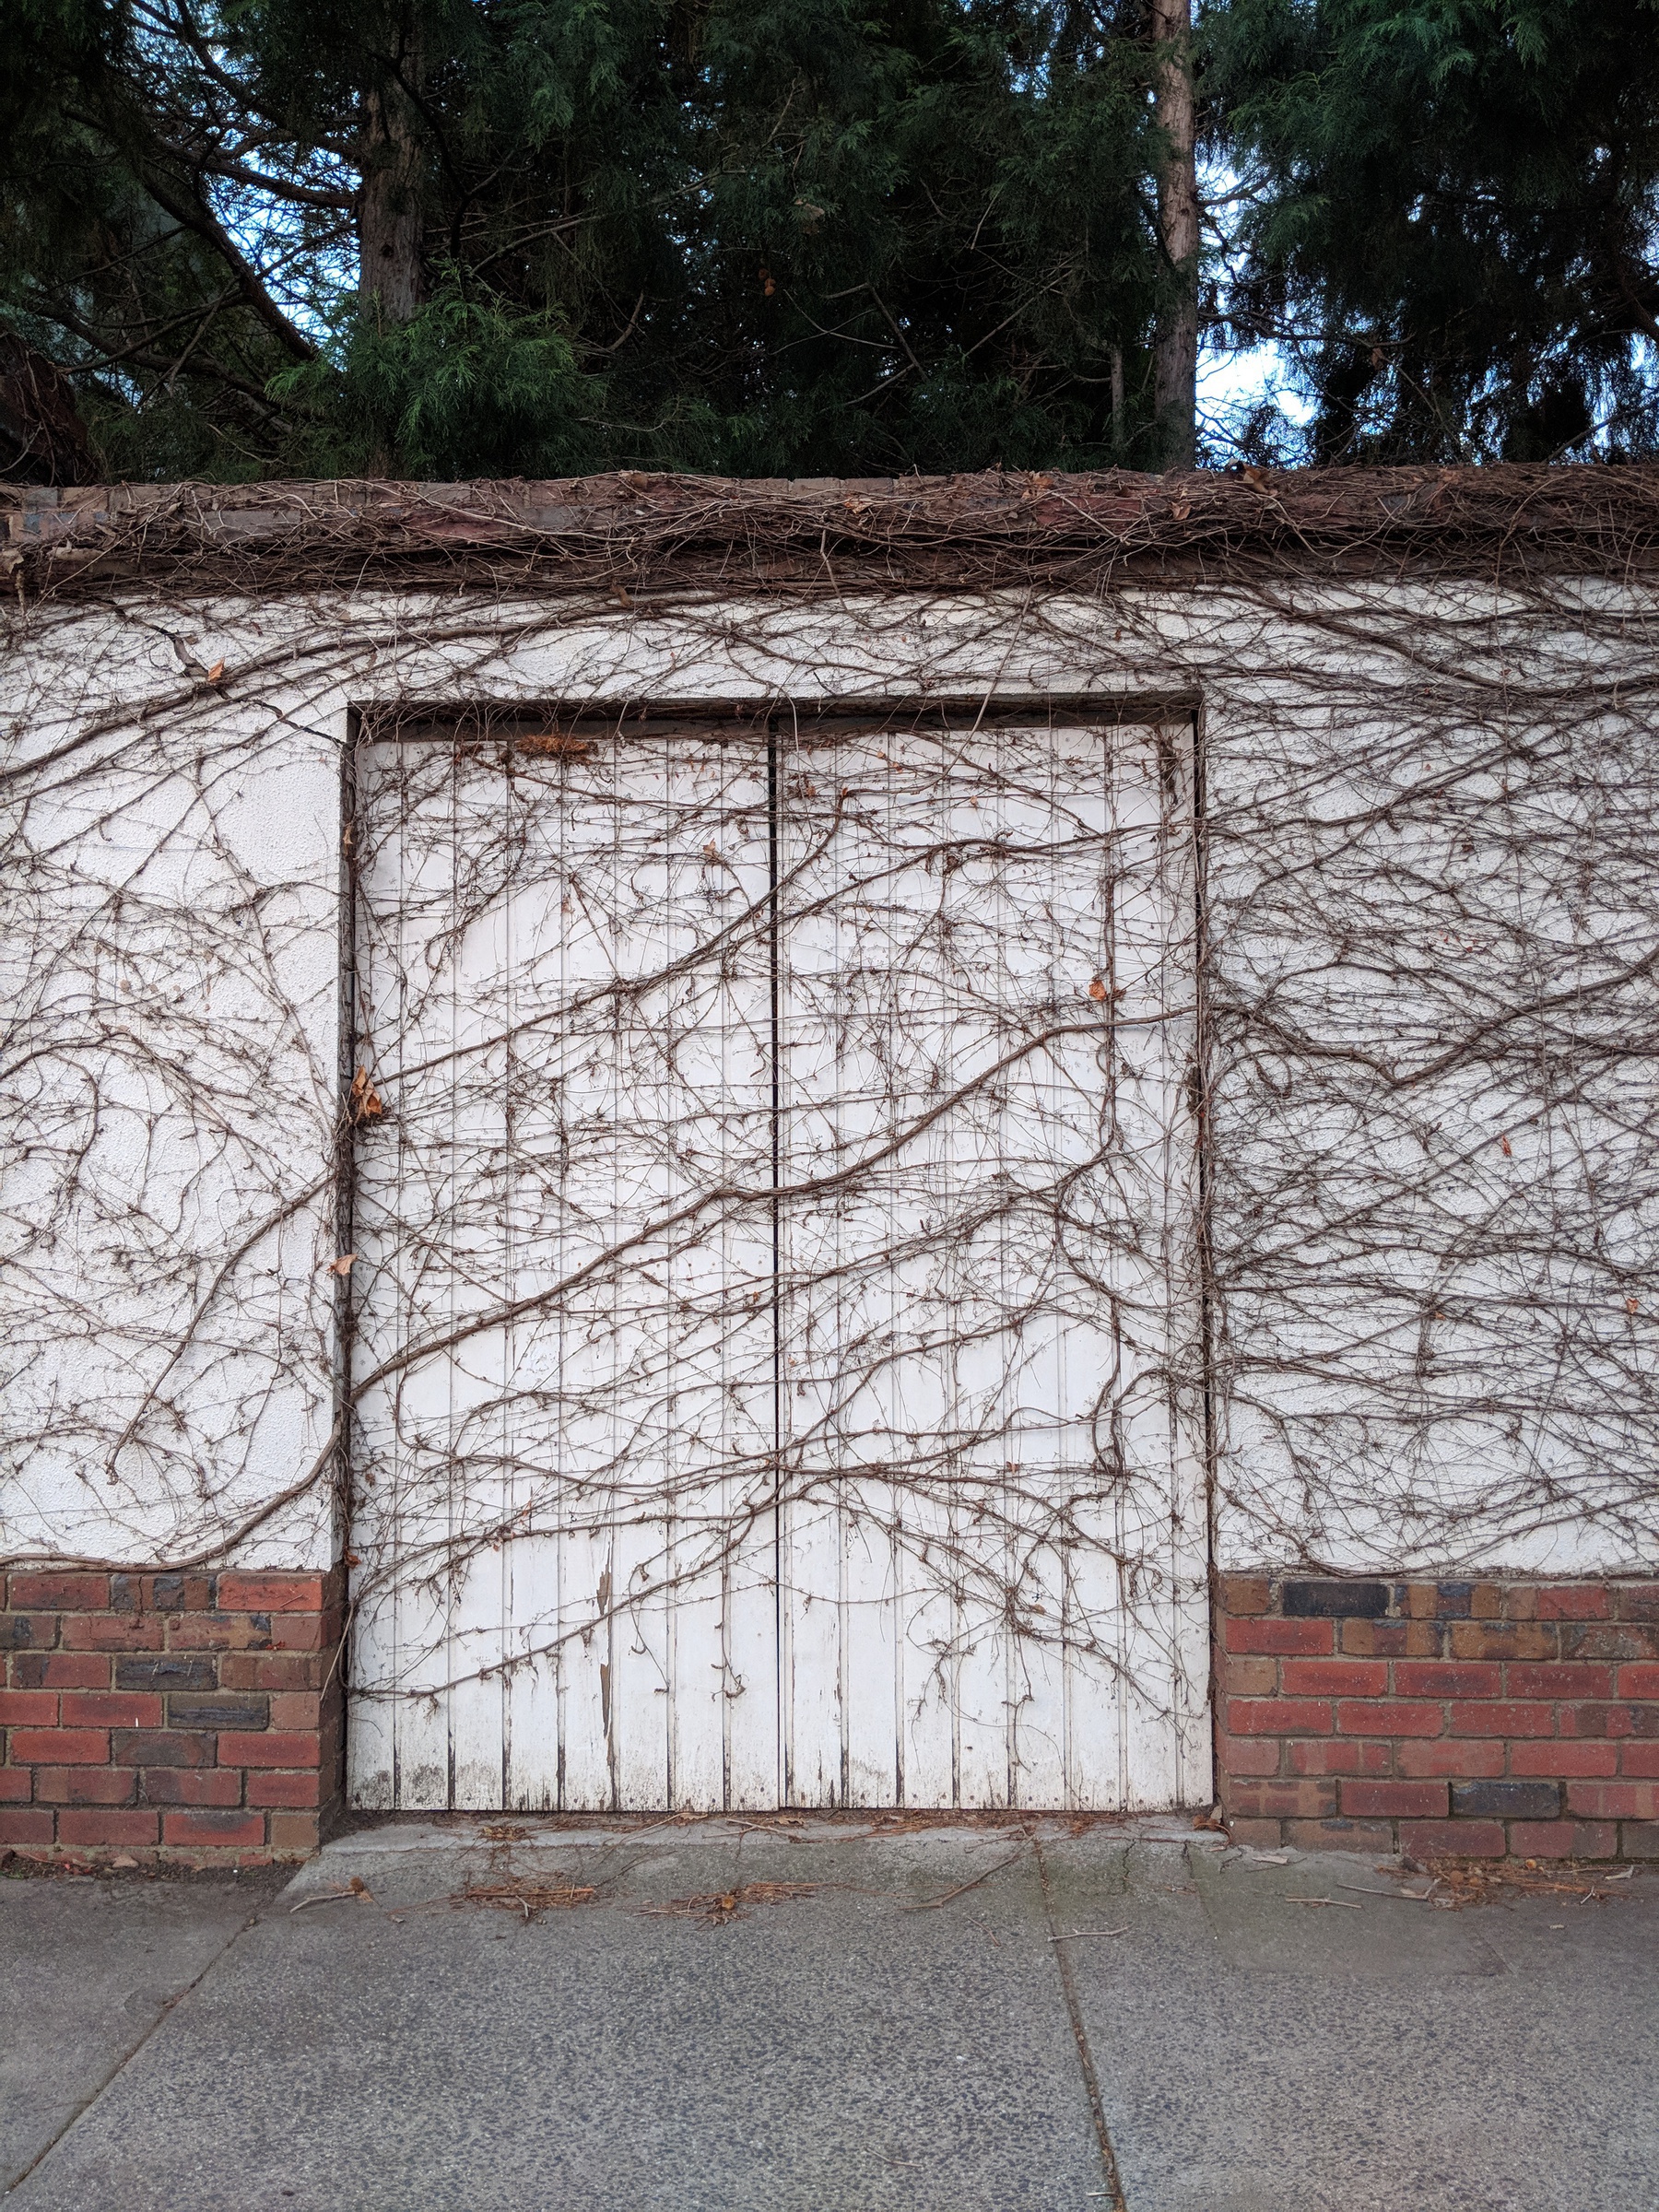 A timber door is set into the white brick wall.  Brown, bare vines snake across the wall and the door, sealing it shut.  Above the wall, one catches a glimpse of green pine trees beyond.